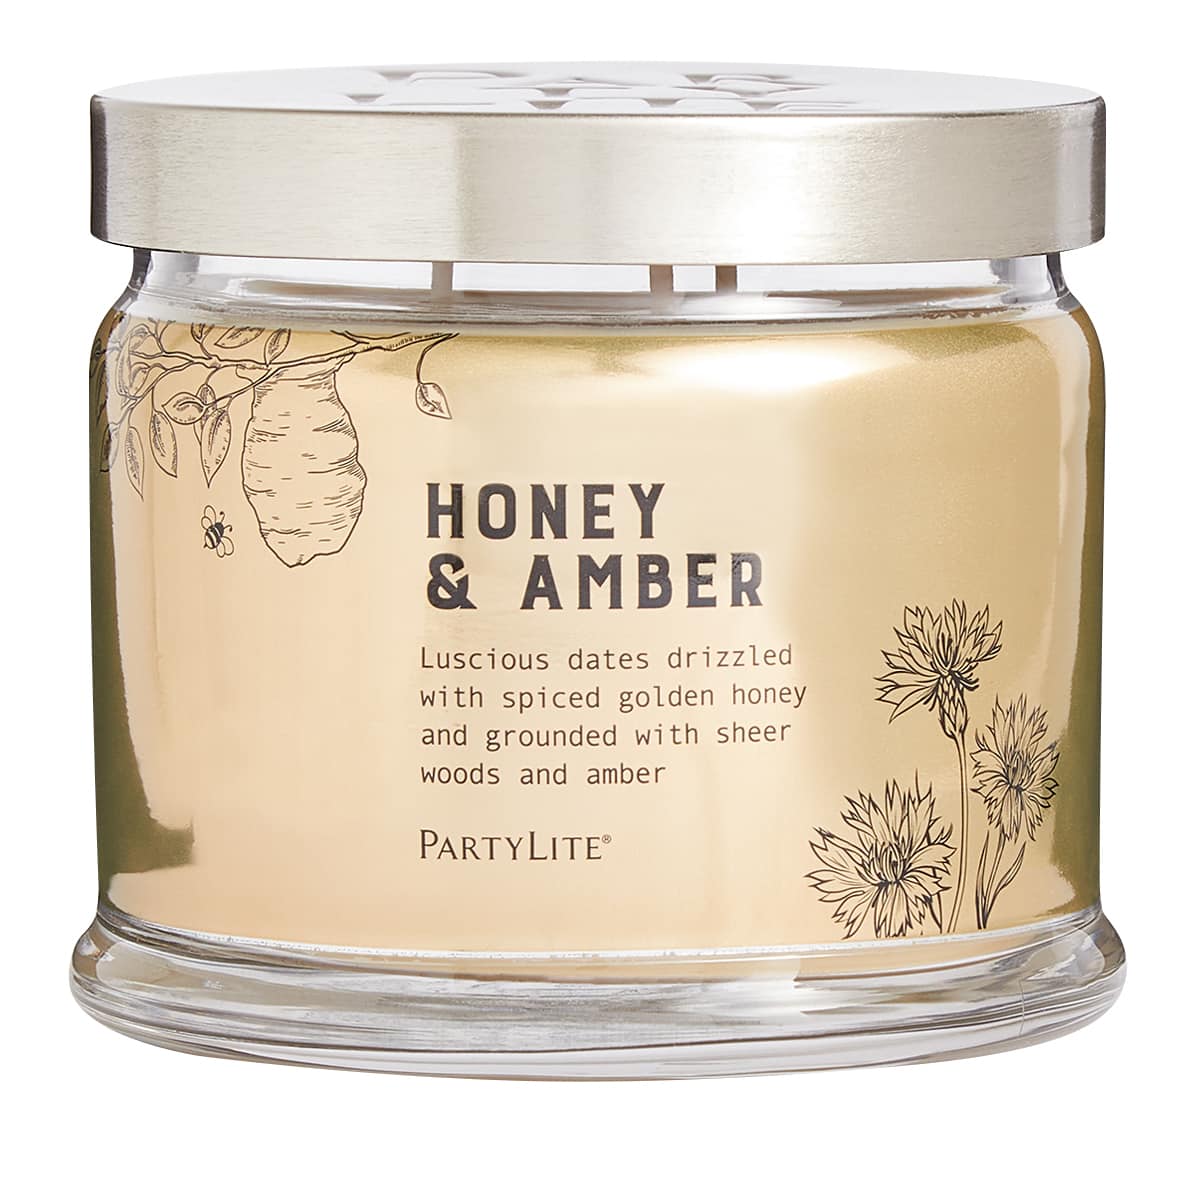 Honey & Amber 3-Wick Jar Candle - PartyLite US